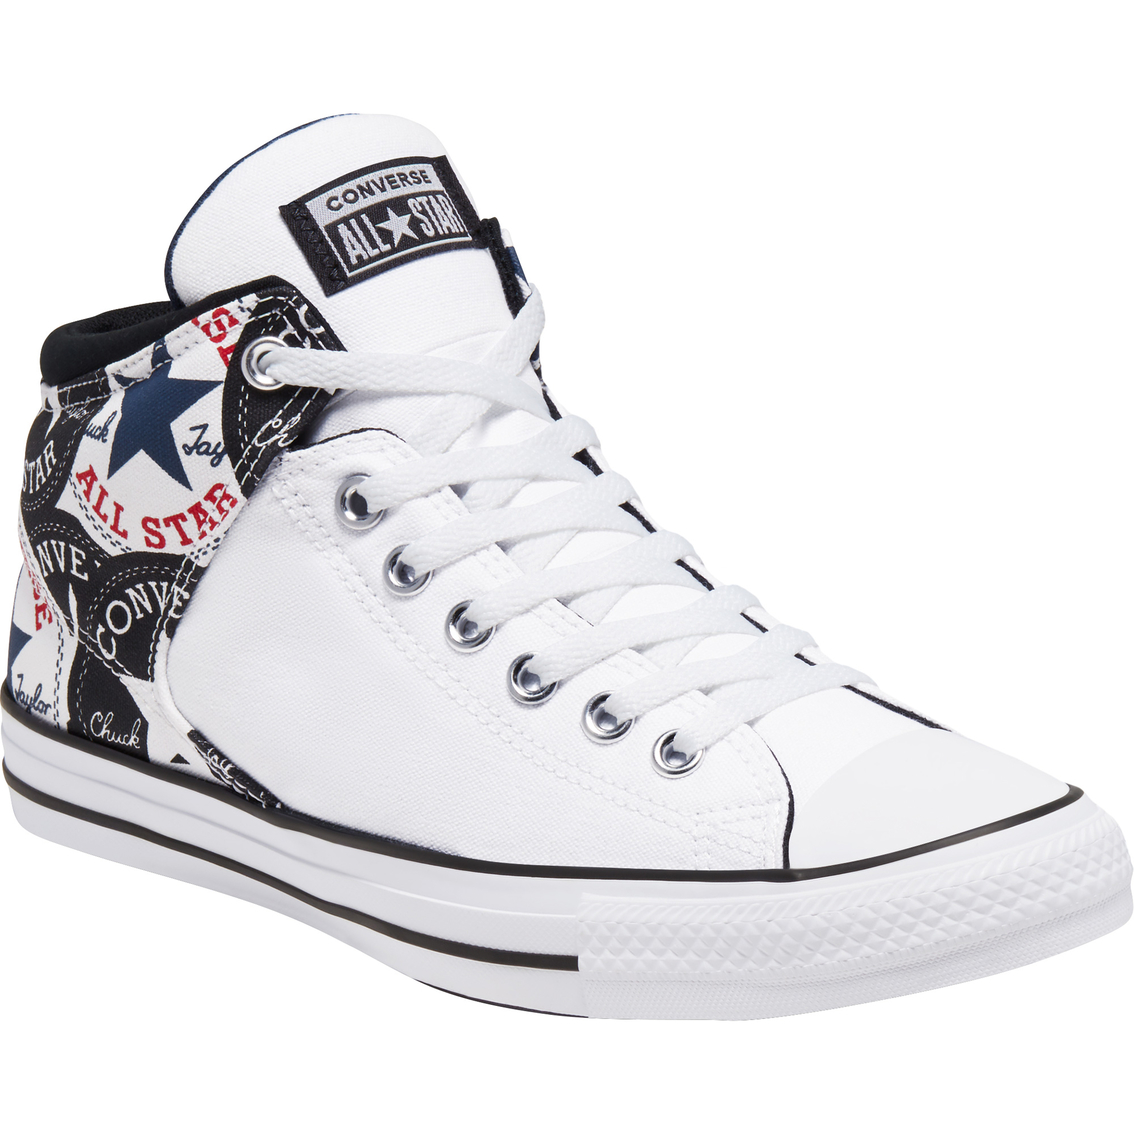 men's converse chuck taylor all star high street mid sneakers